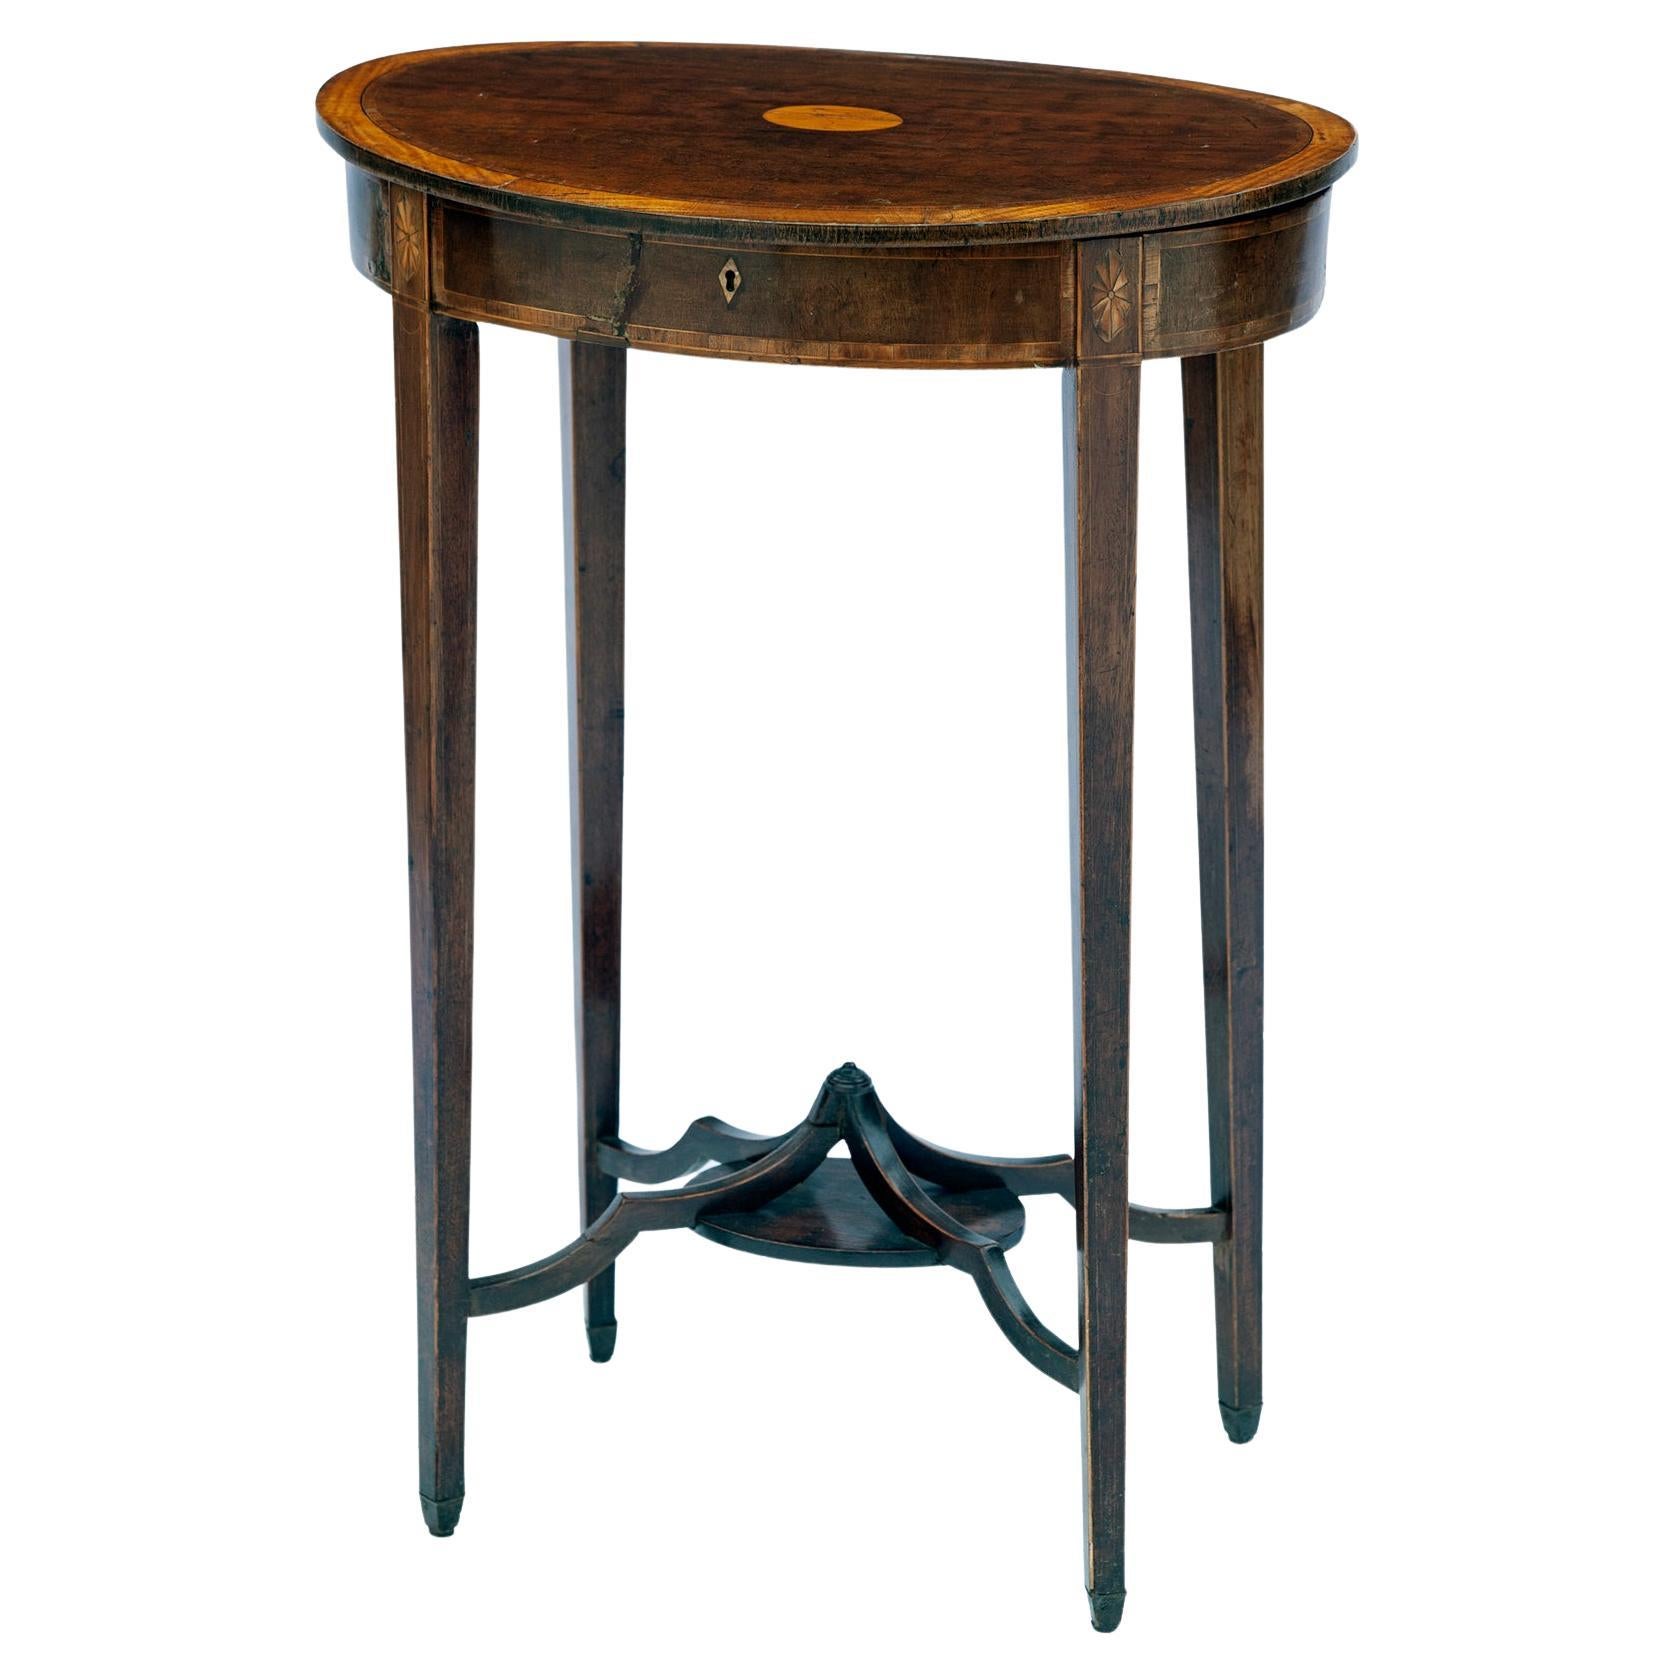 Elegant accent table with tapered square legs, unique stretchers, inlaid banding & faux drawer. Beautiful French polished finish.
Top is slightly bowed.
